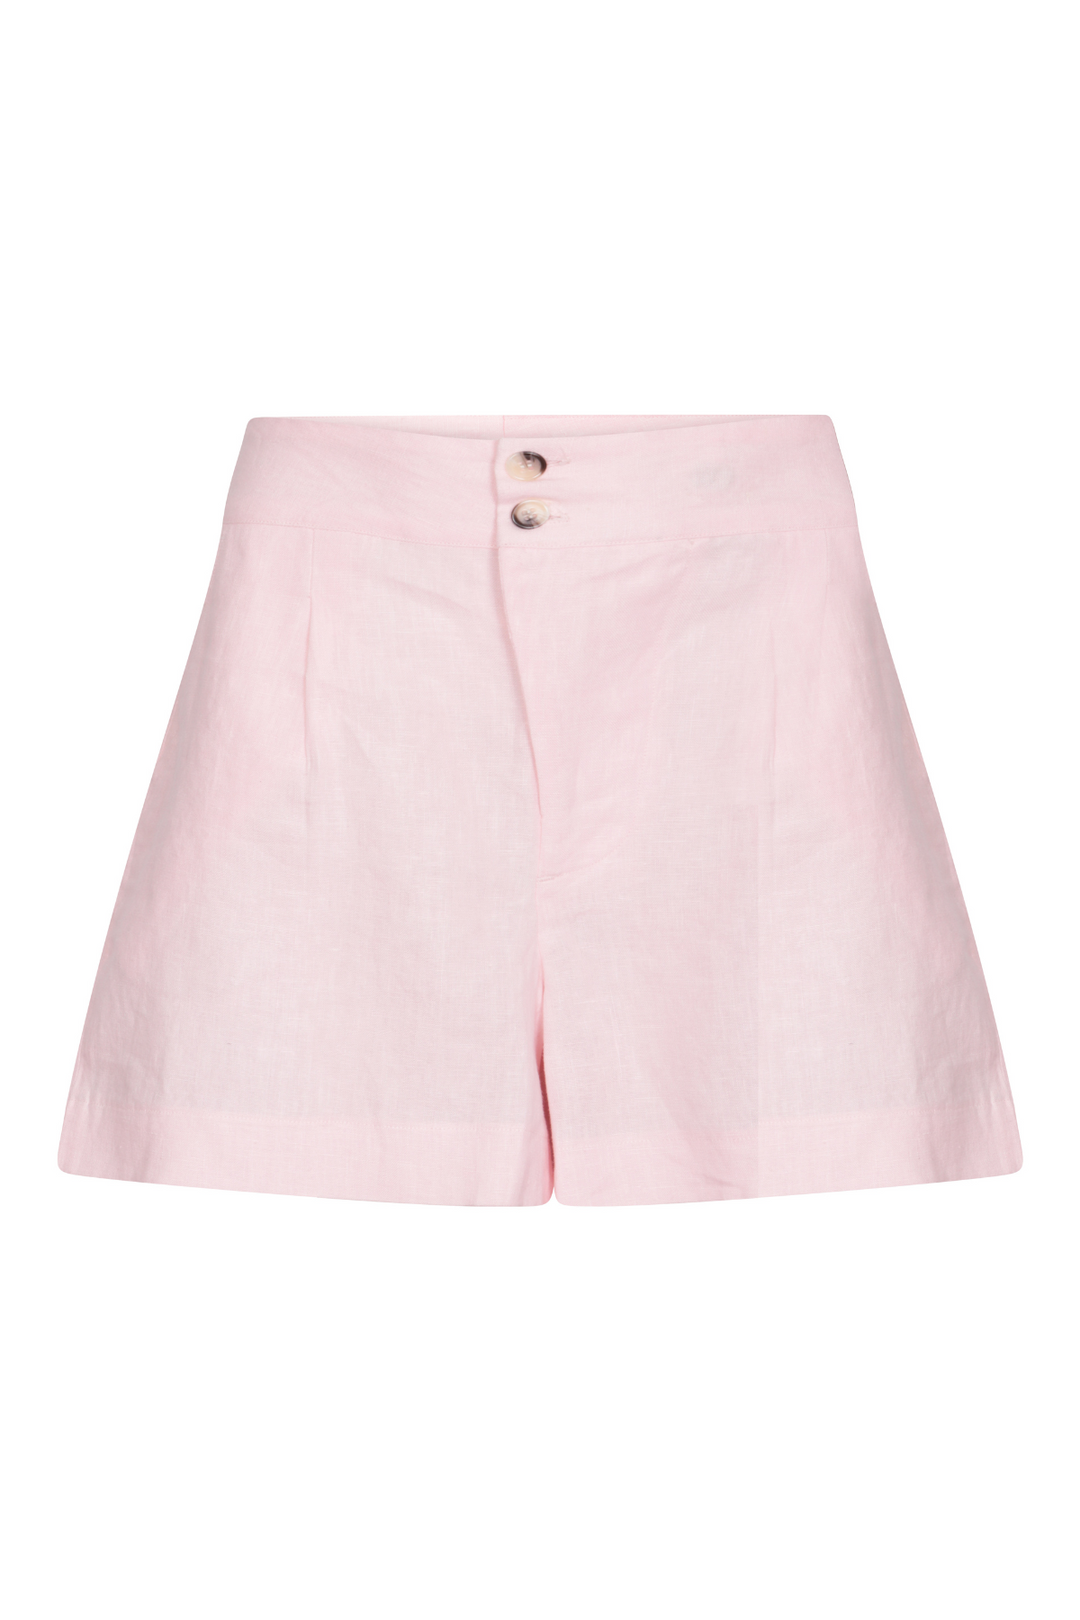 pure linen pink tailored shorts with white details